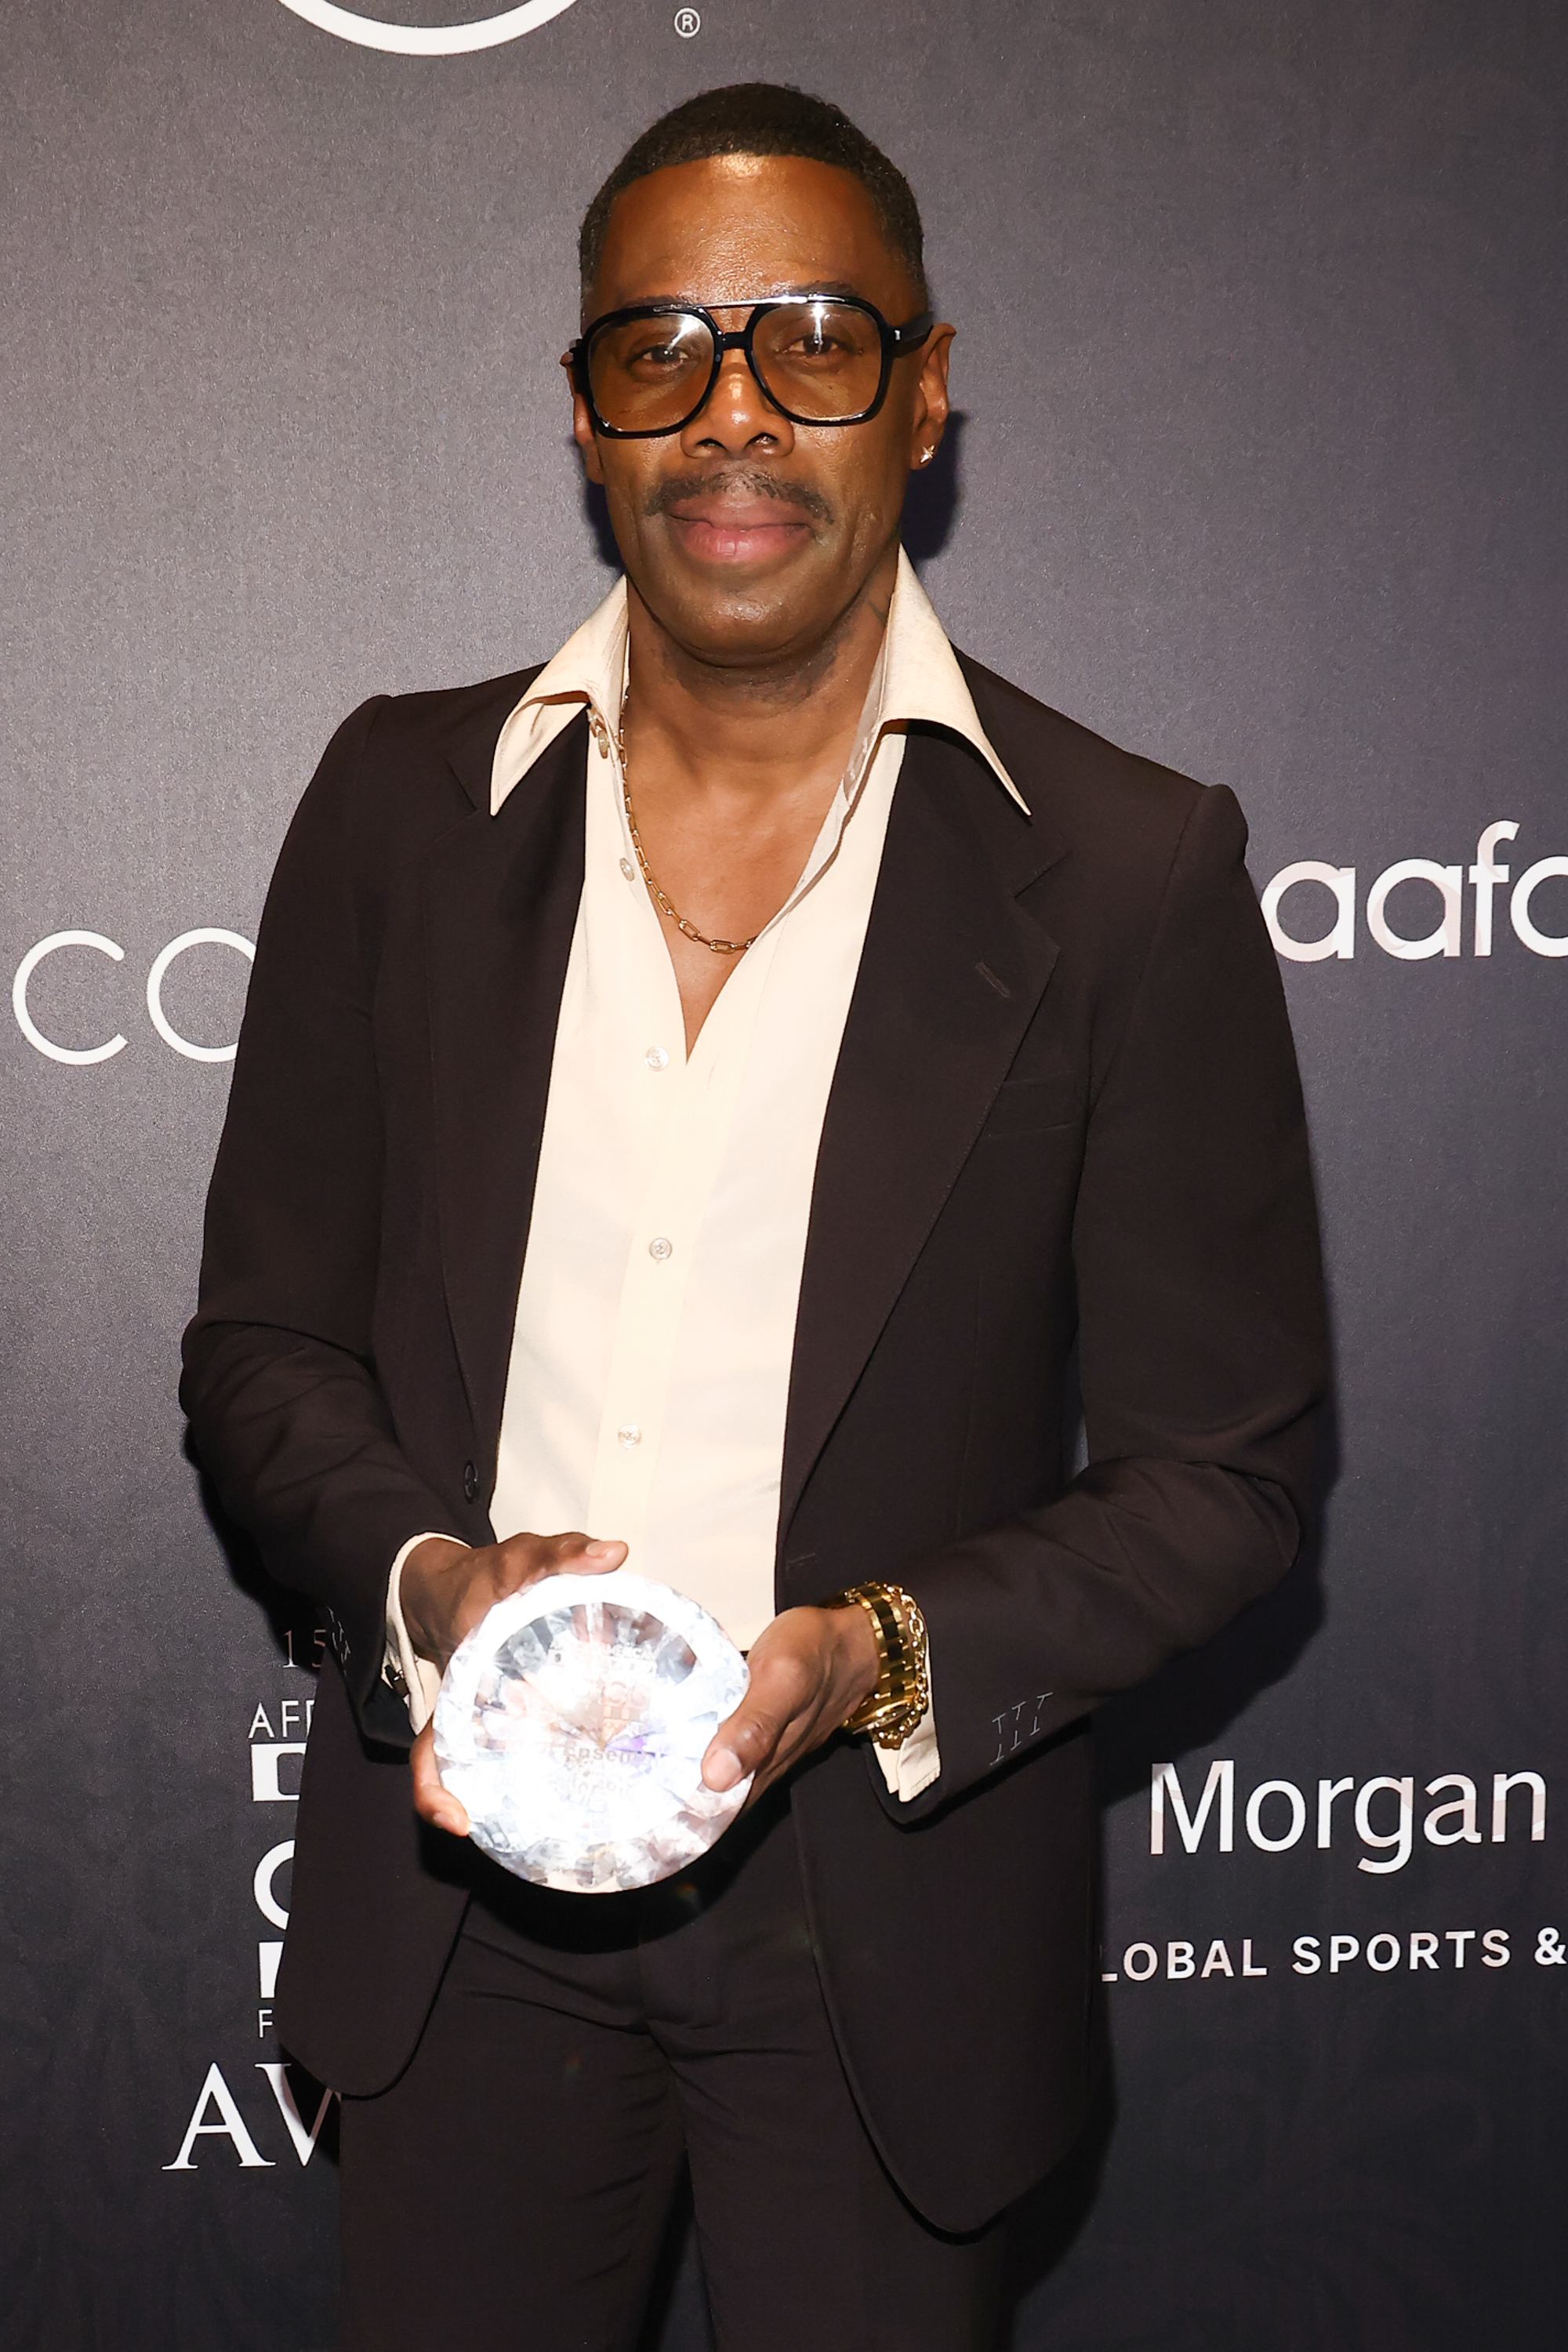 Colman Domingo posing with an award, wearing glasses, and a suit with an unbuttoned shirt